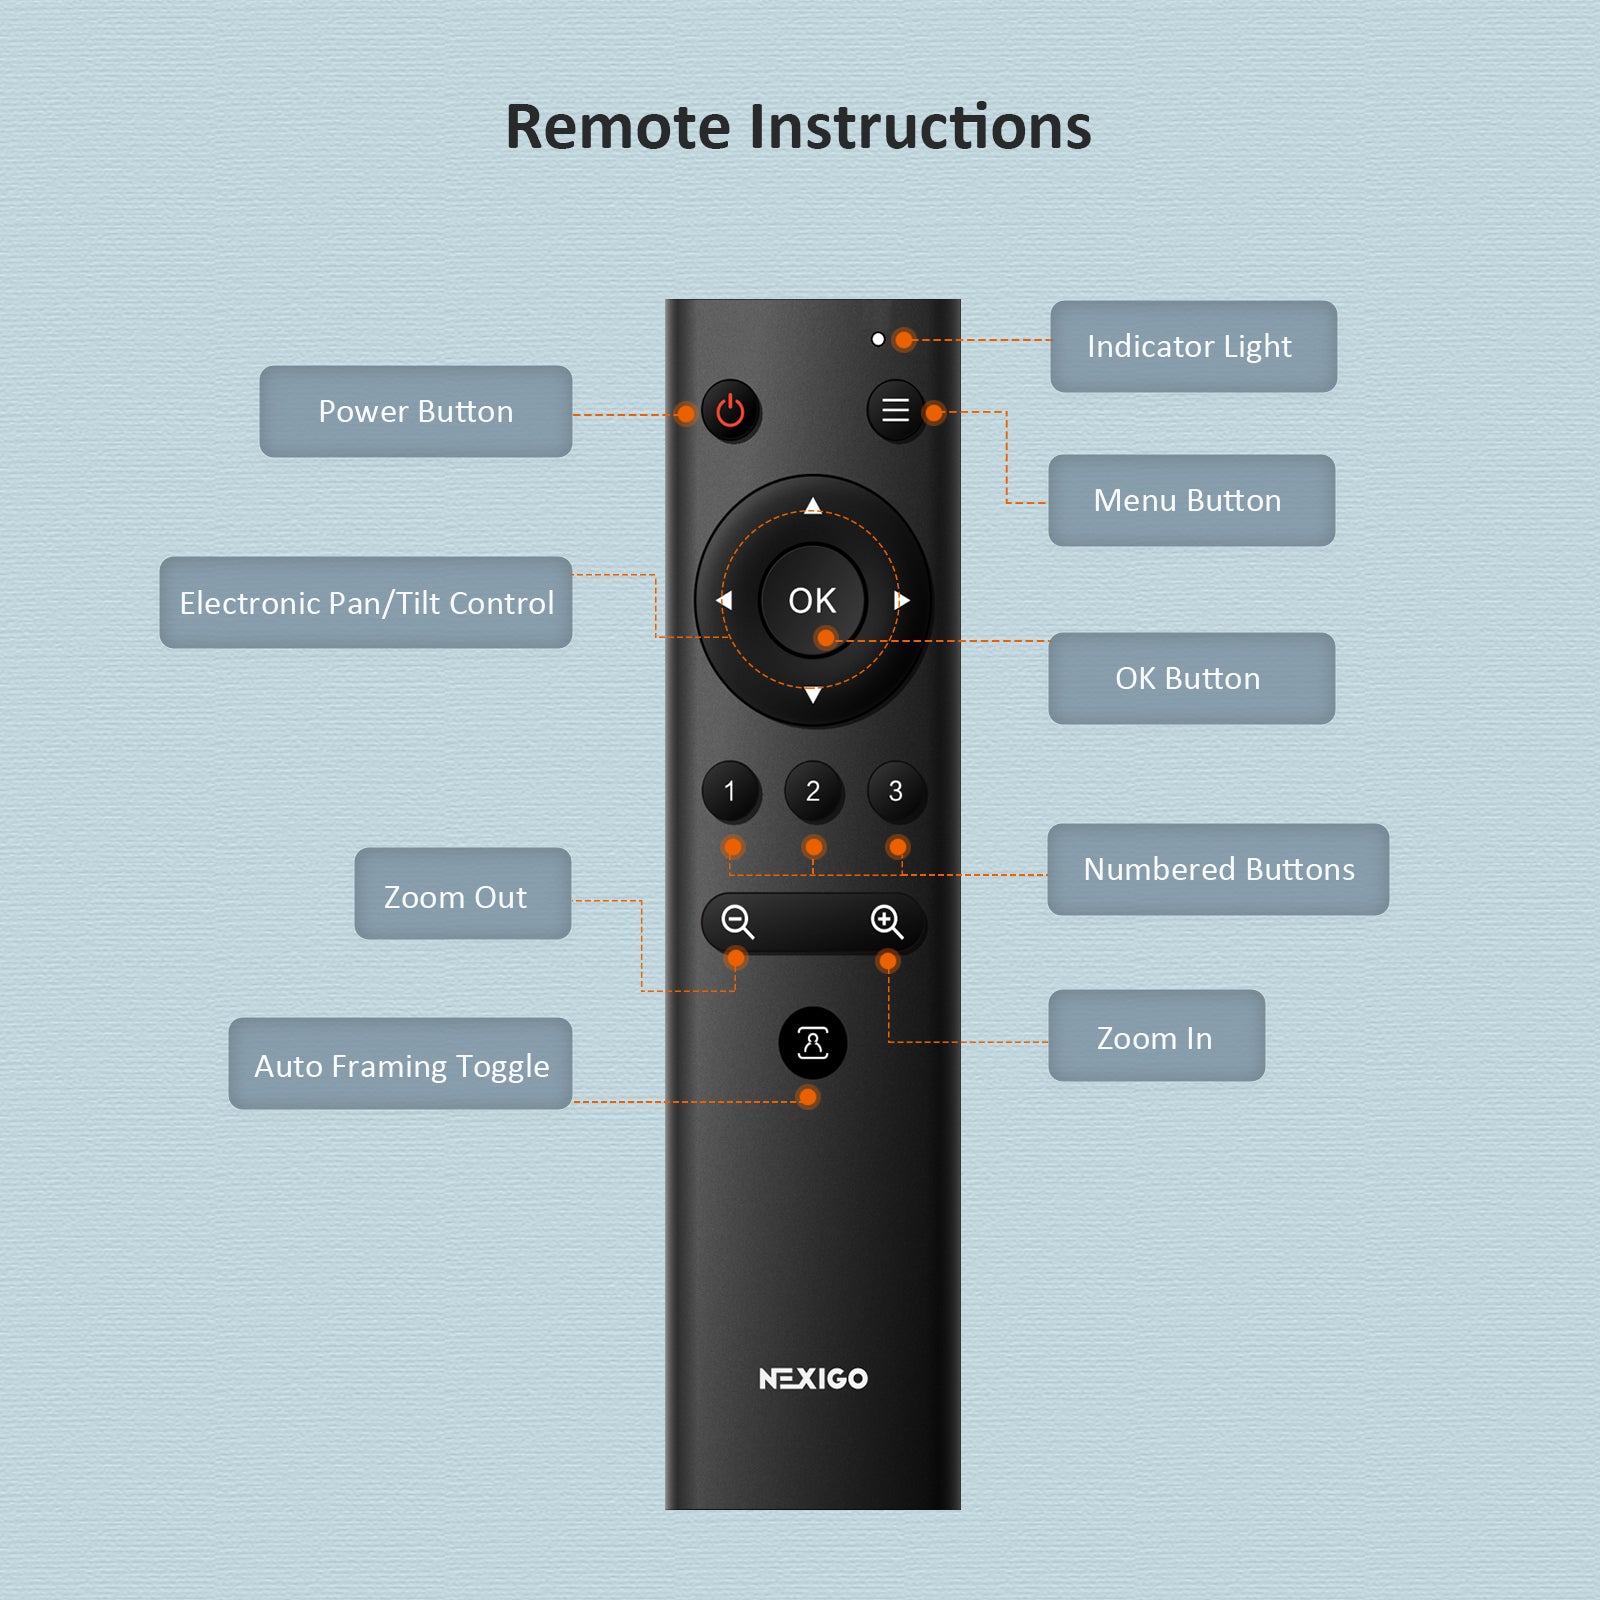 The webcam remote control has an Electronic Pan/Tilt Control, Zoom Out/In, and Auto Framing Toggle. 